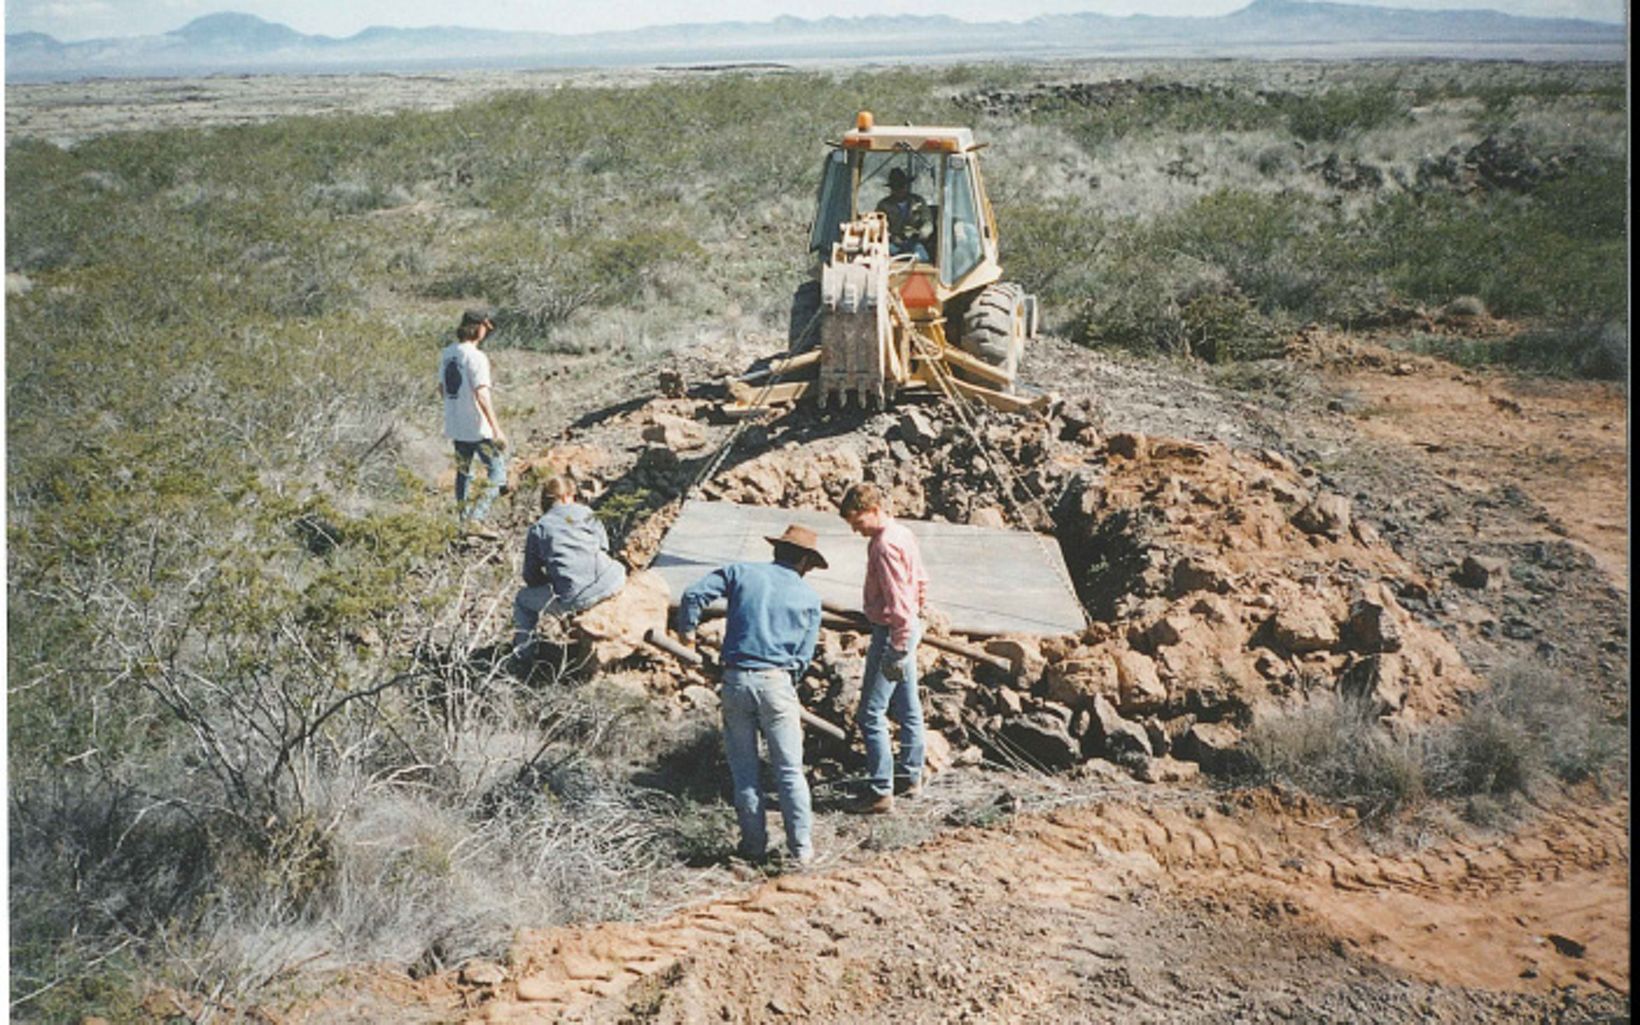 Armendaris Ranch staff work with the University of New Mexico and TNC to plug a “skylight” excavated by miners to provide easier access to bat guano in the lava cave below.